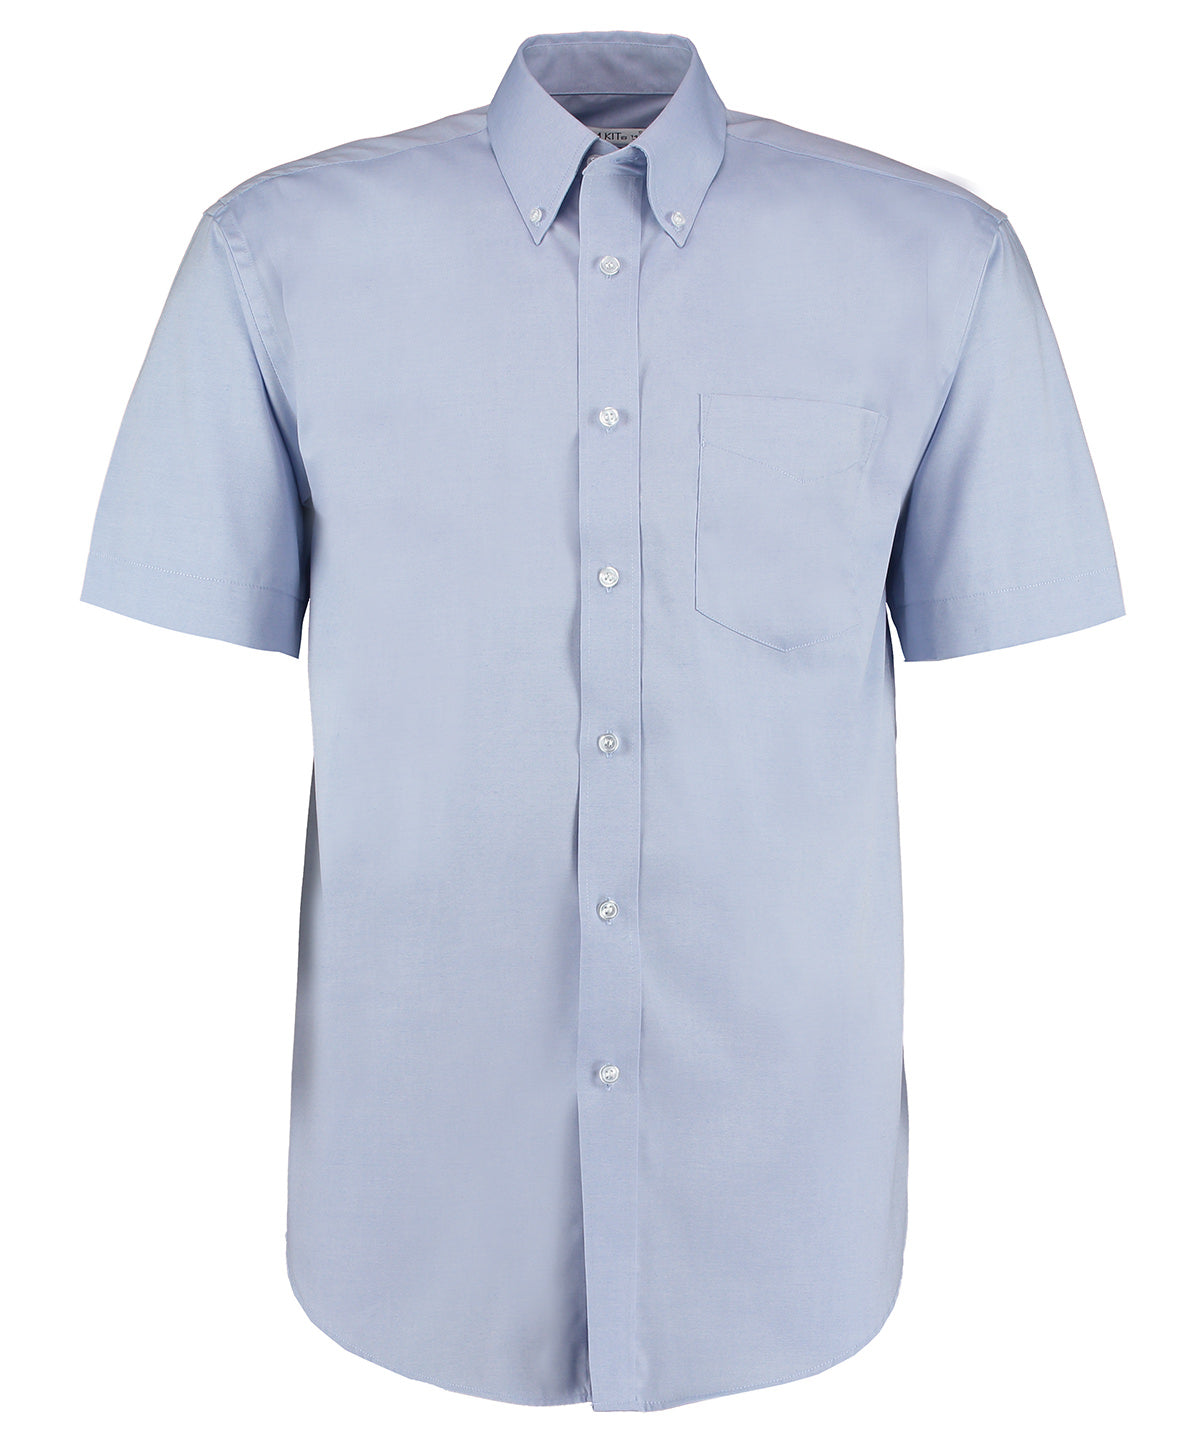 Bolir - Corporate Oxford Shirt Short-sleeved (classic Fit)